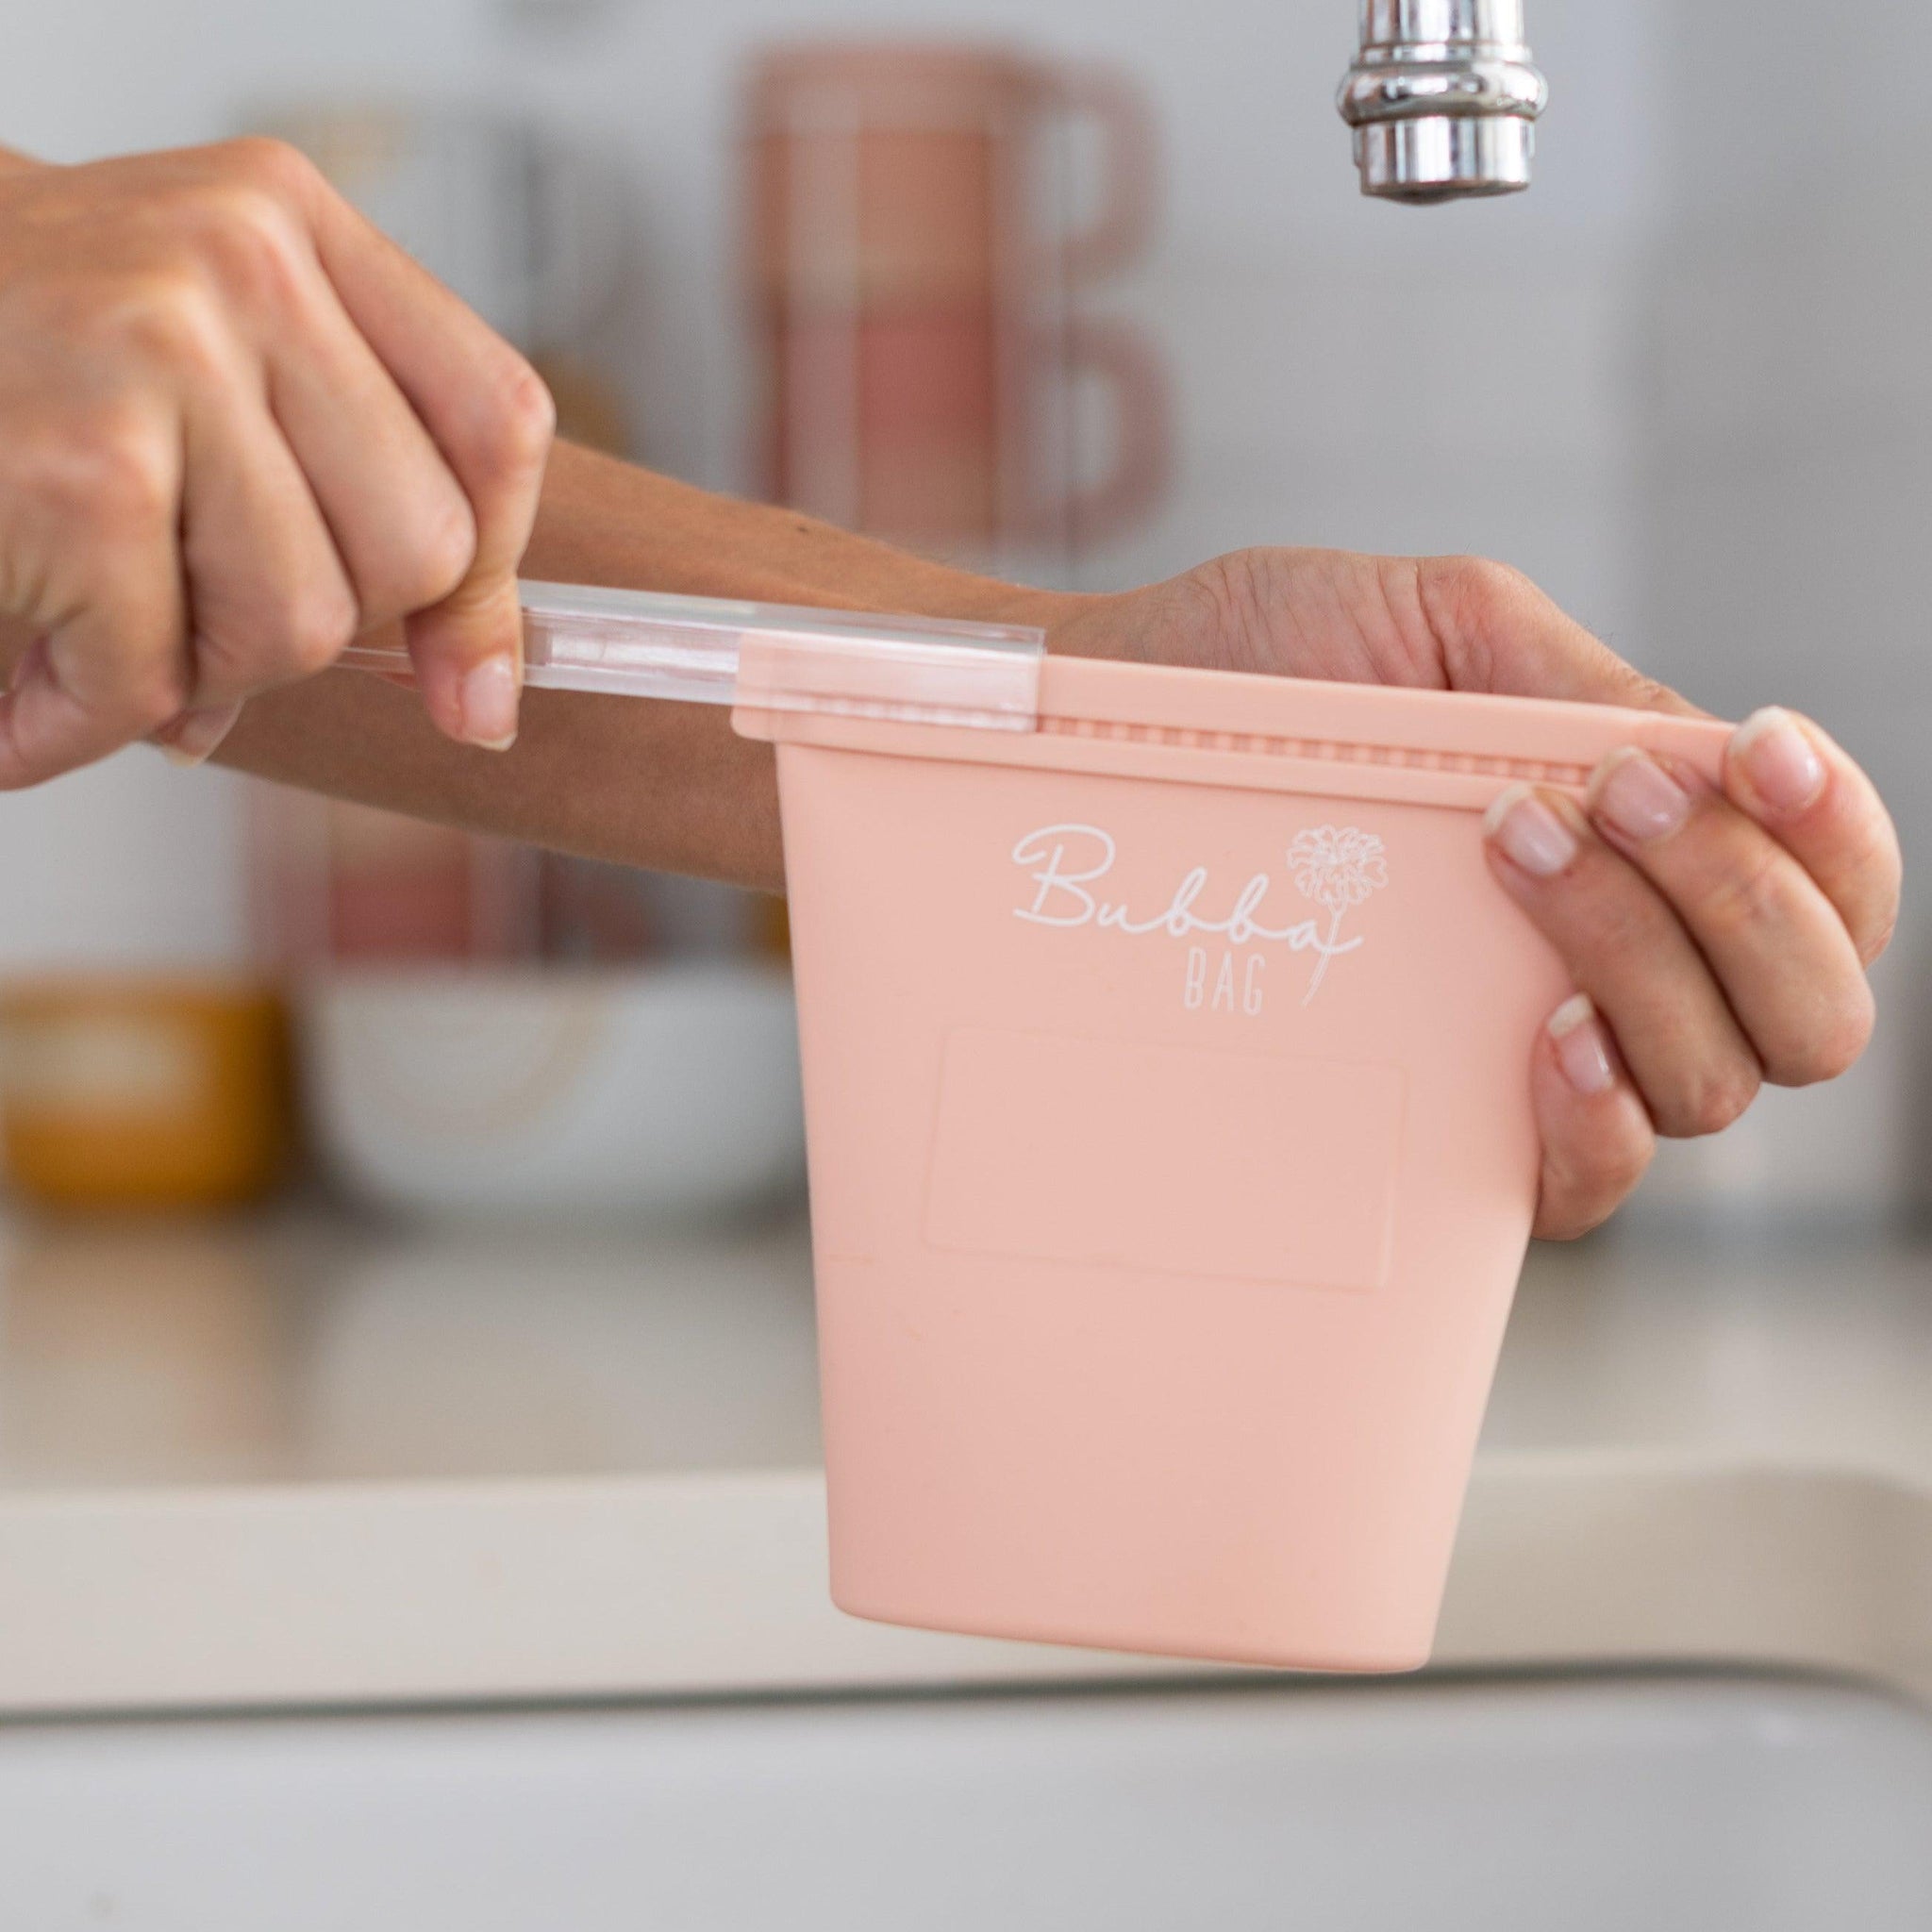 A person is holding a Marigold Baby pink plastic cup in front of a sink.